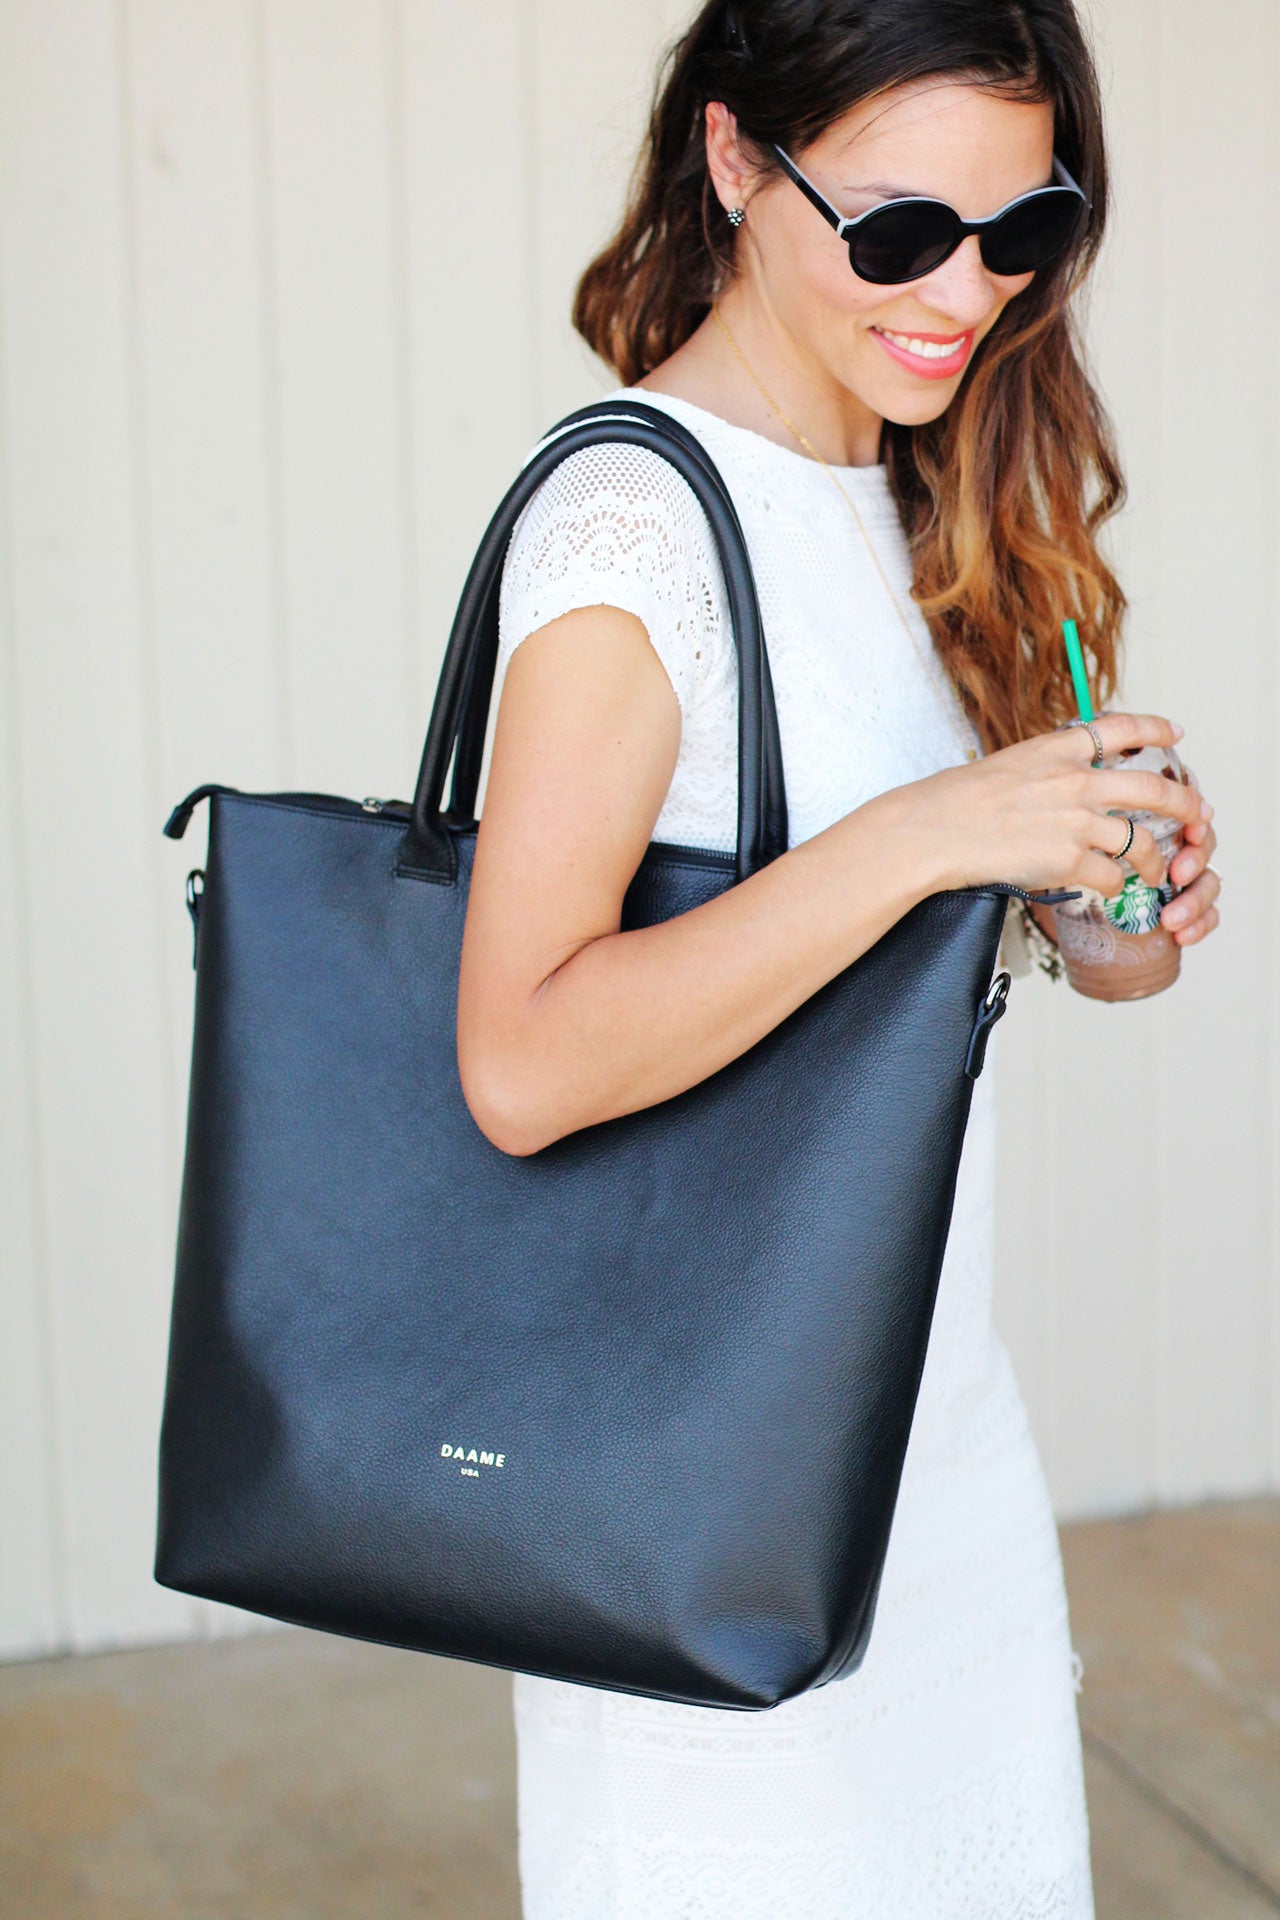 Anna's Daame leather laptop tote